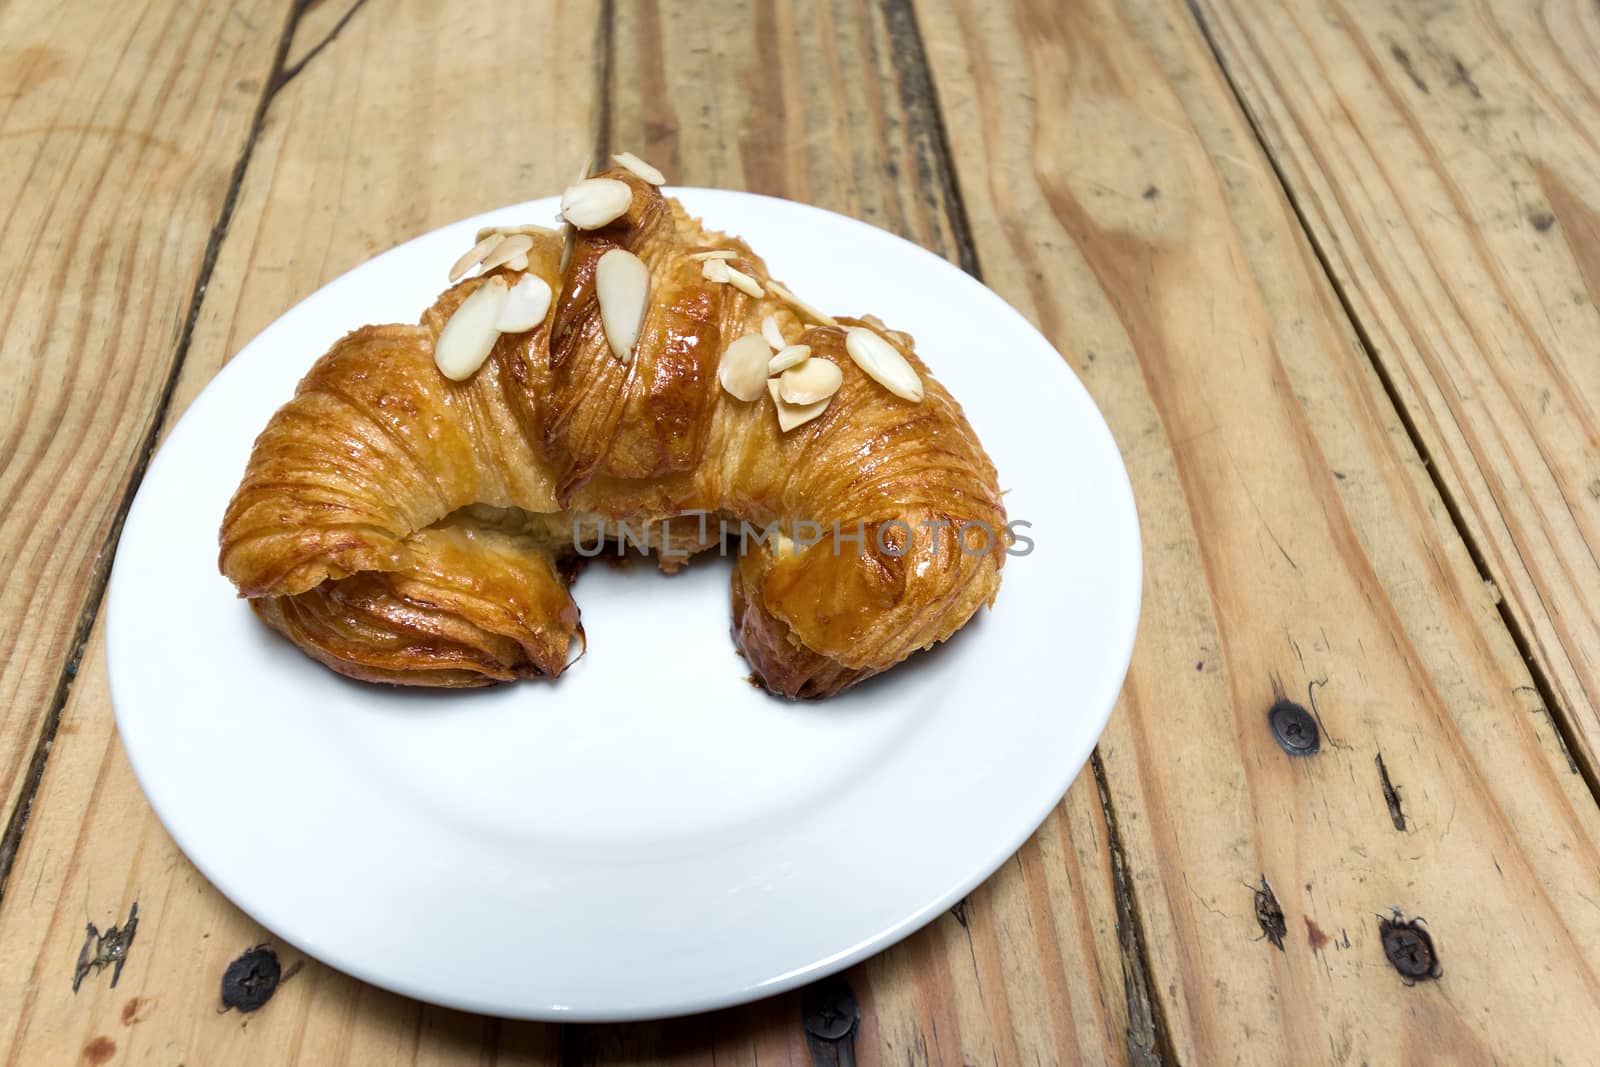 Almond Croissant on a White Plate by jpldesigns